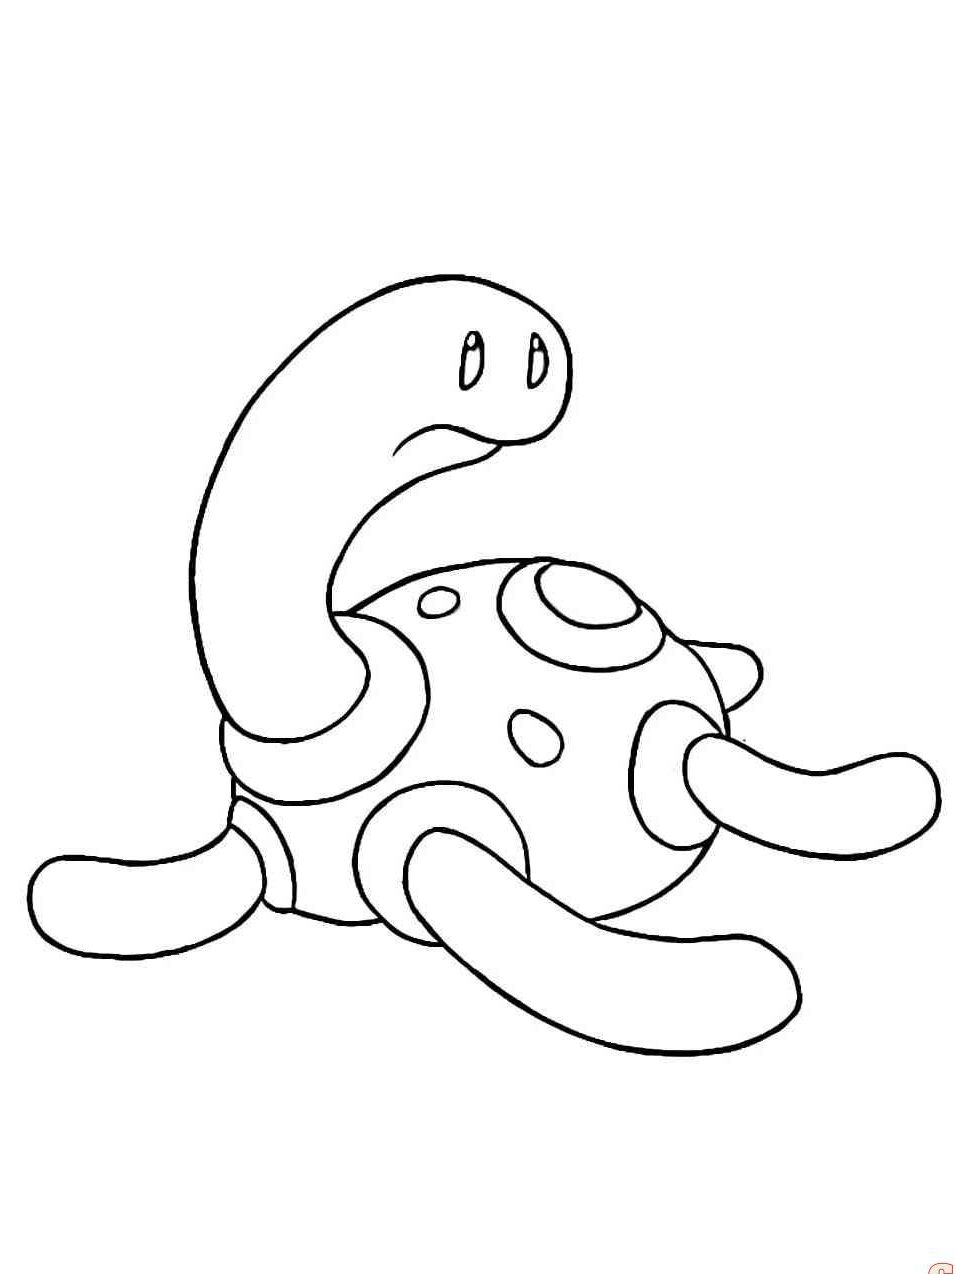 Shuckle Coloring Pages 1